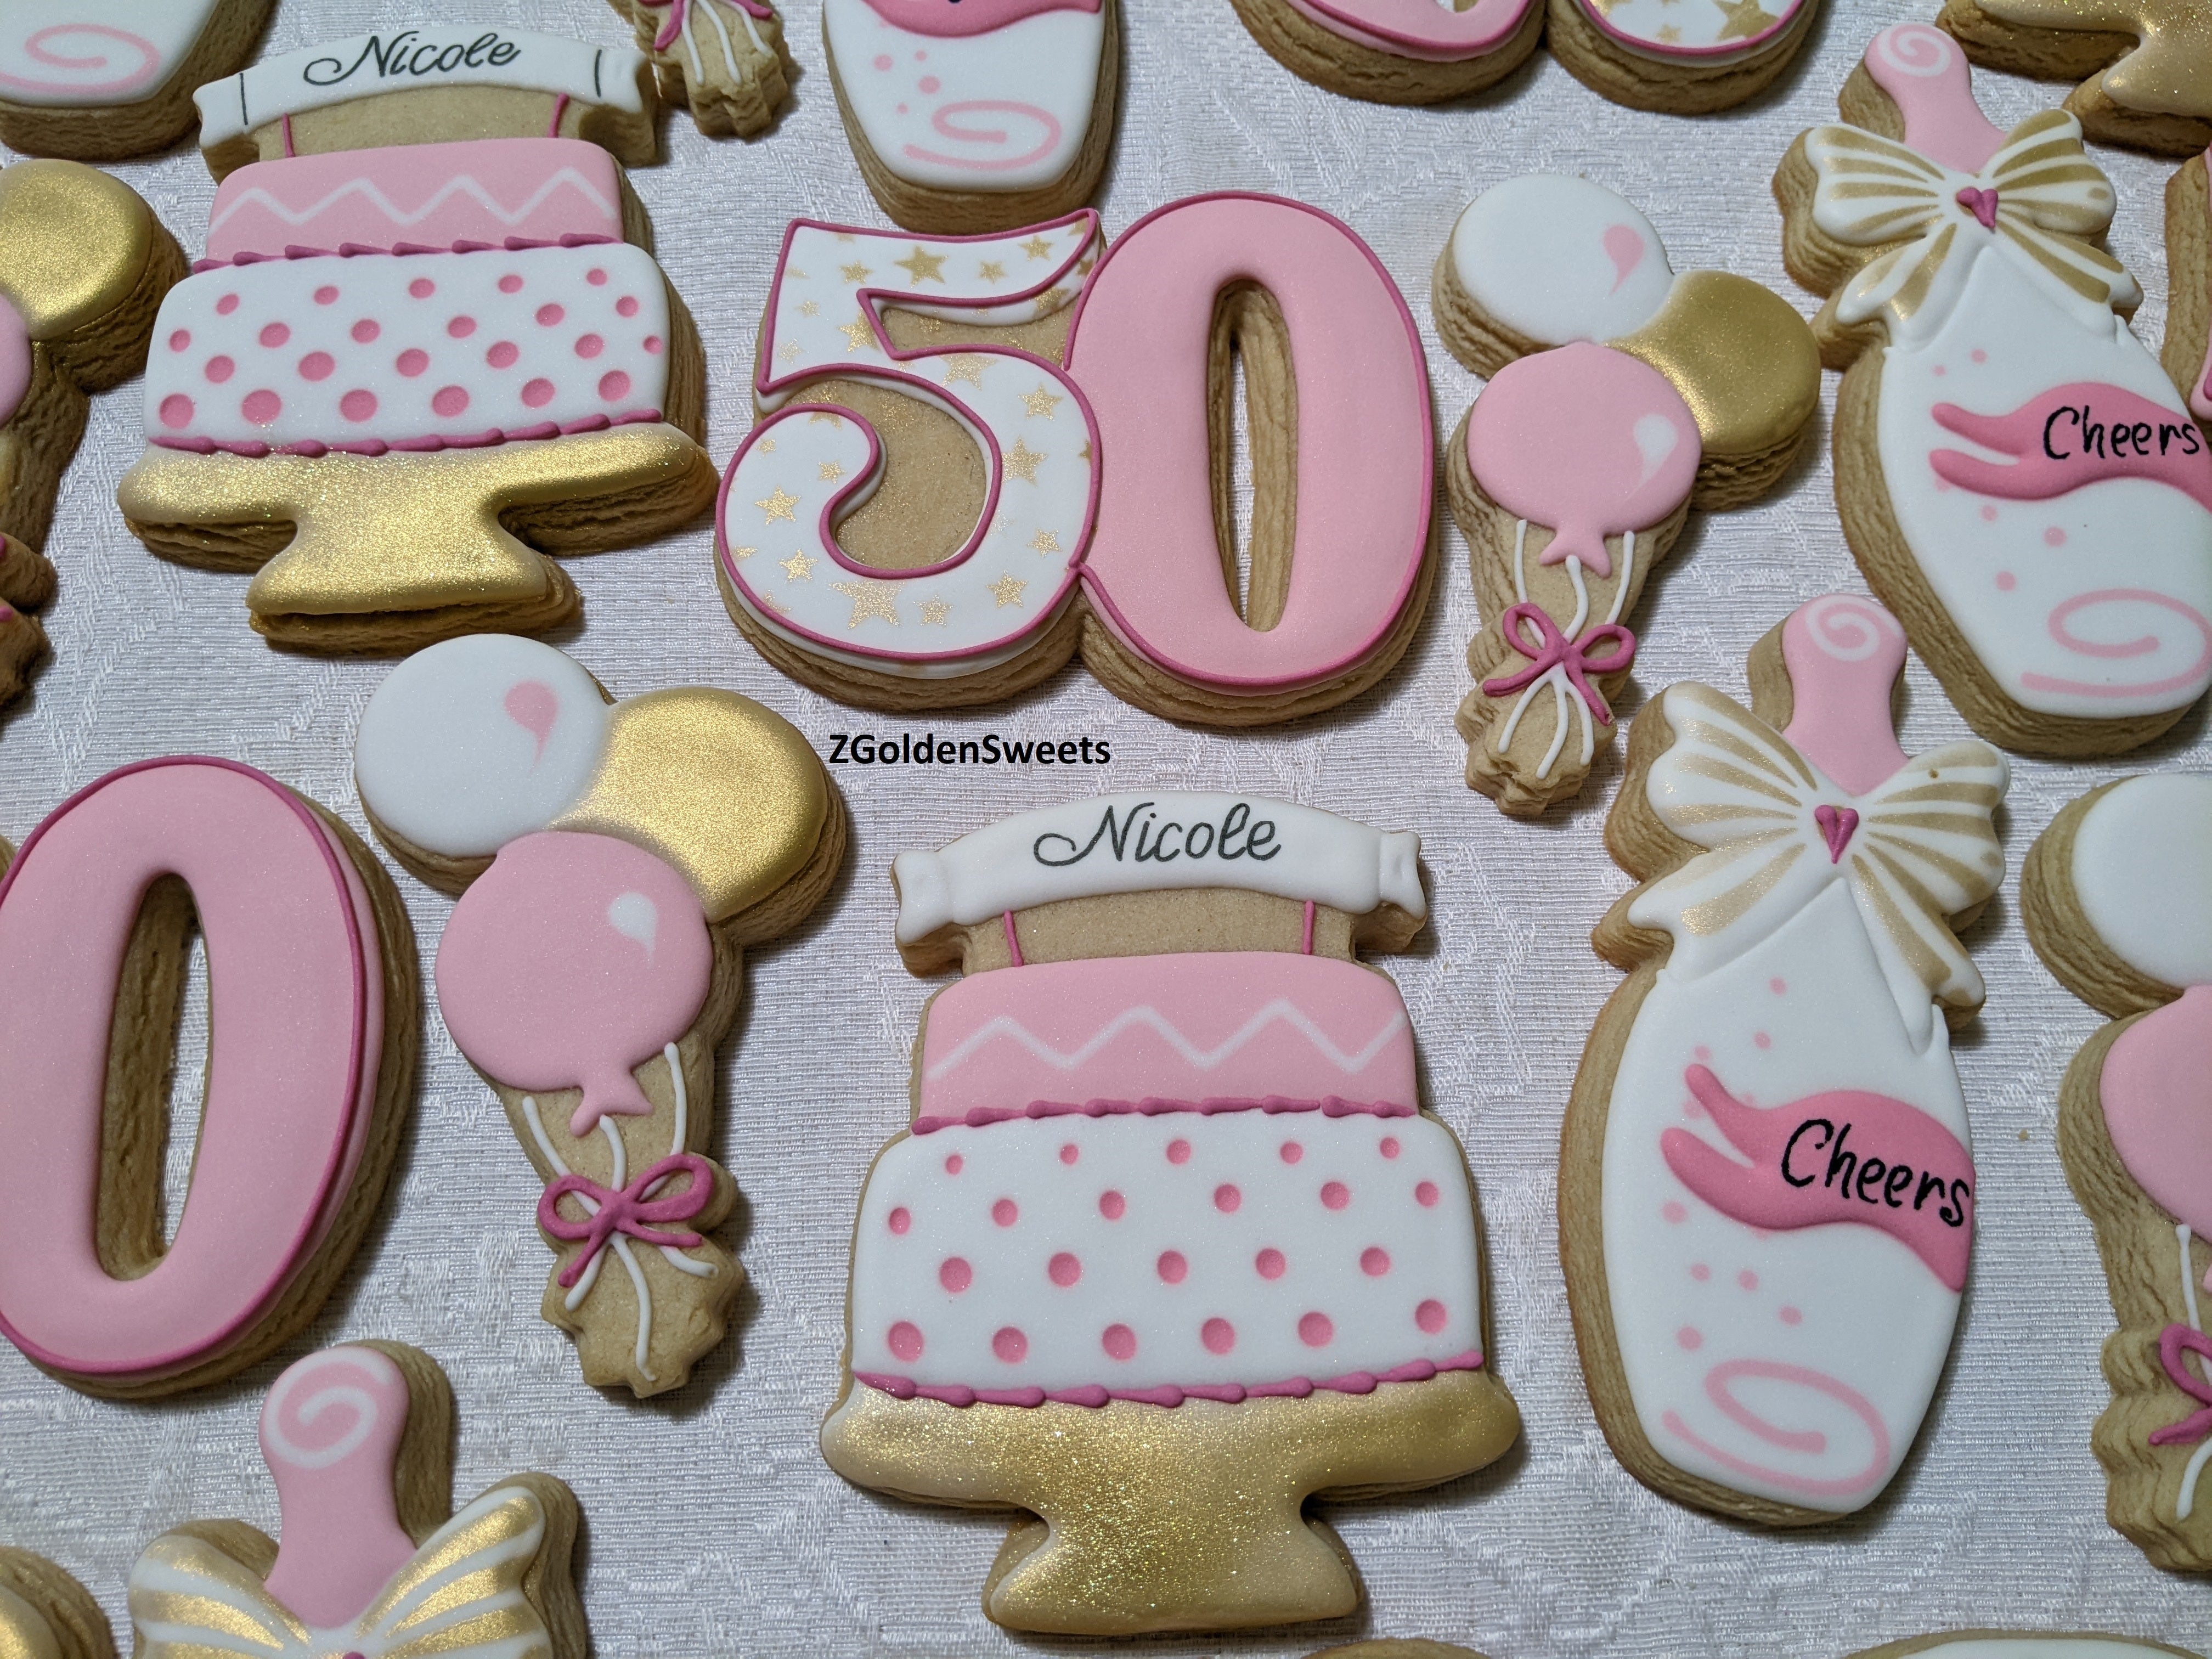 50th Birthday Party 24 Personalized Decorated Cookies